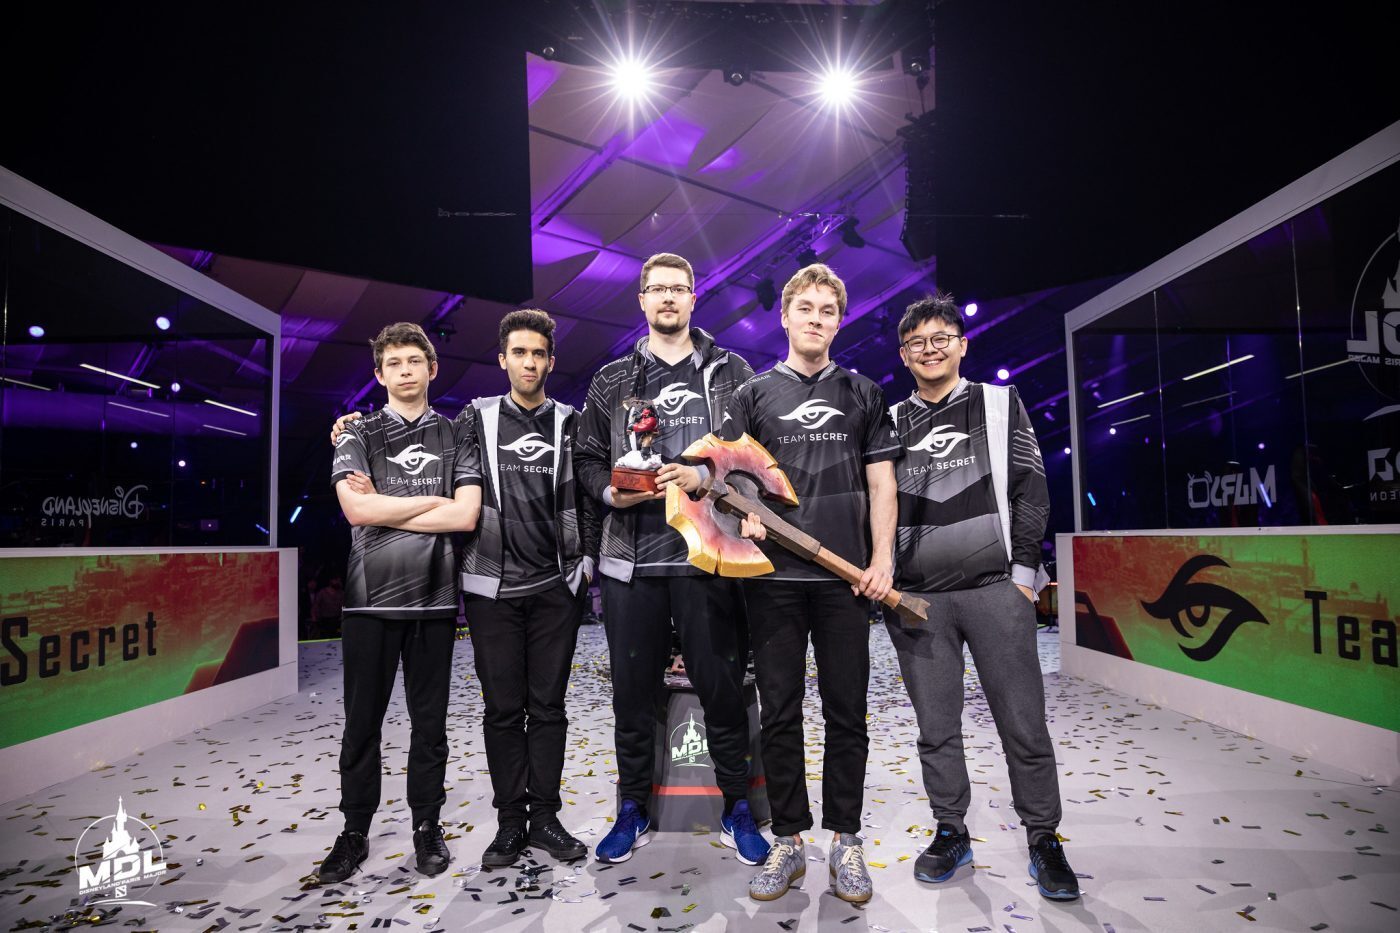 Team Secret have a huge target on them at TI9, after winning two Majors this season. Image courtesy of Elliot Le Corre for Mars Media.